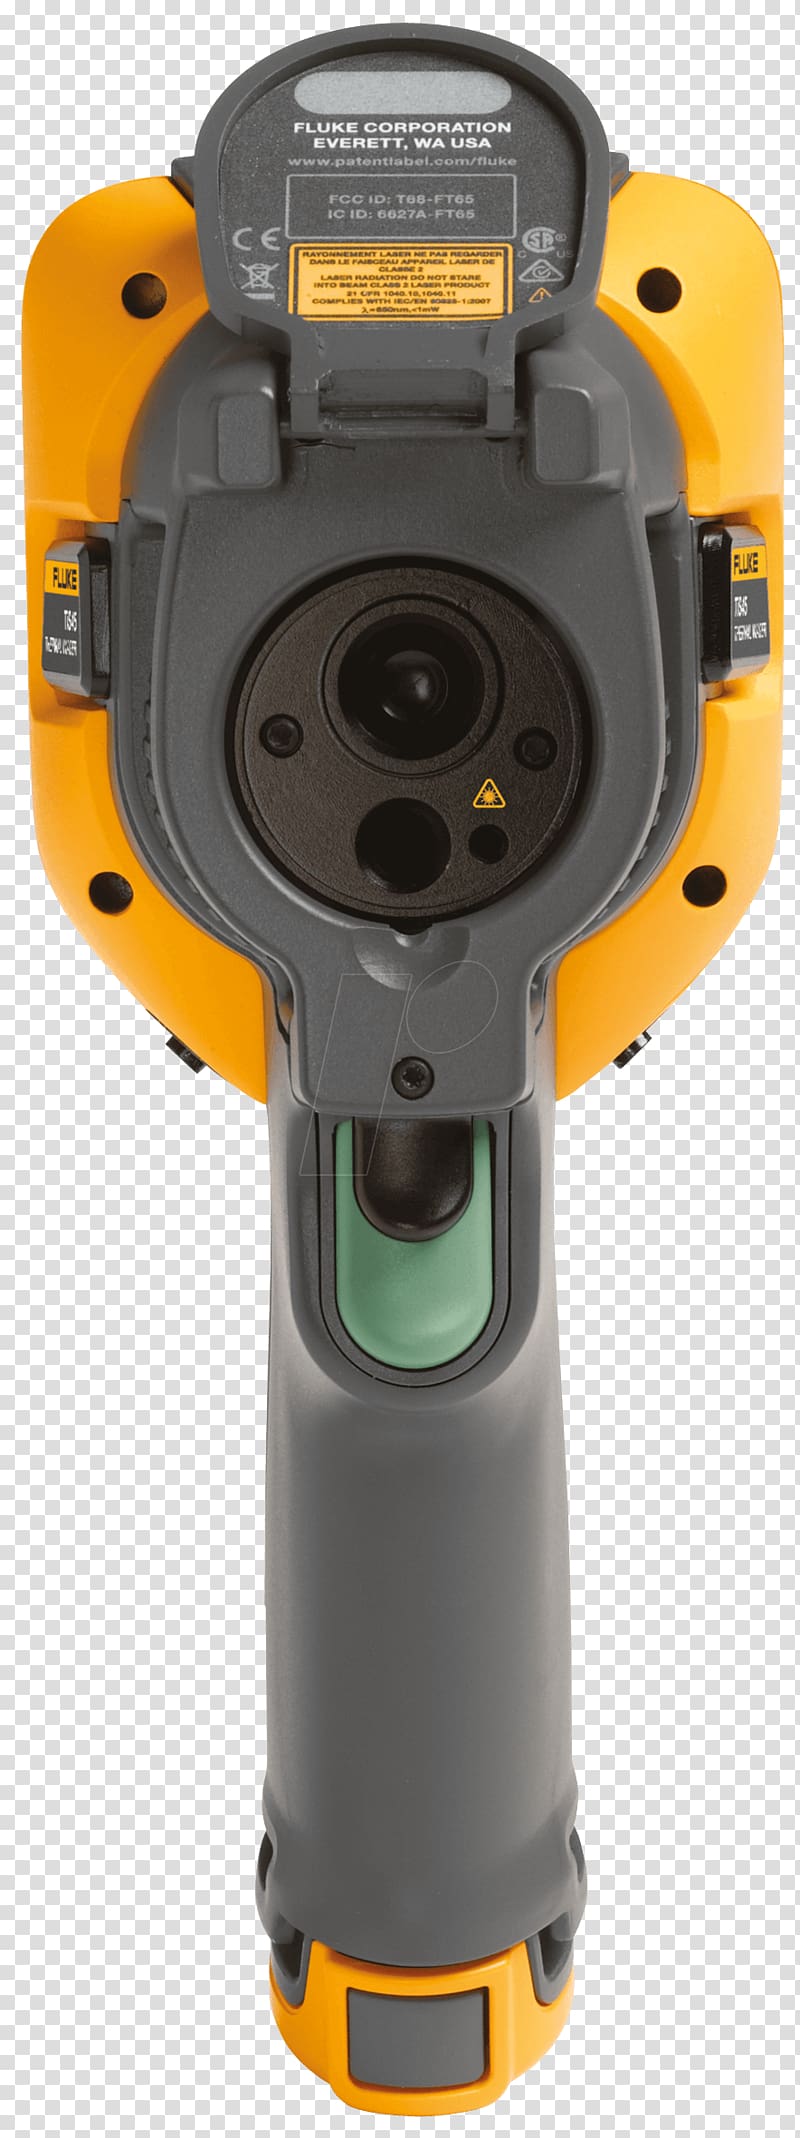 Thermographic camera Thermal imaging camera Fluke Corporation Thermography, Camera transparent background PNG clipart